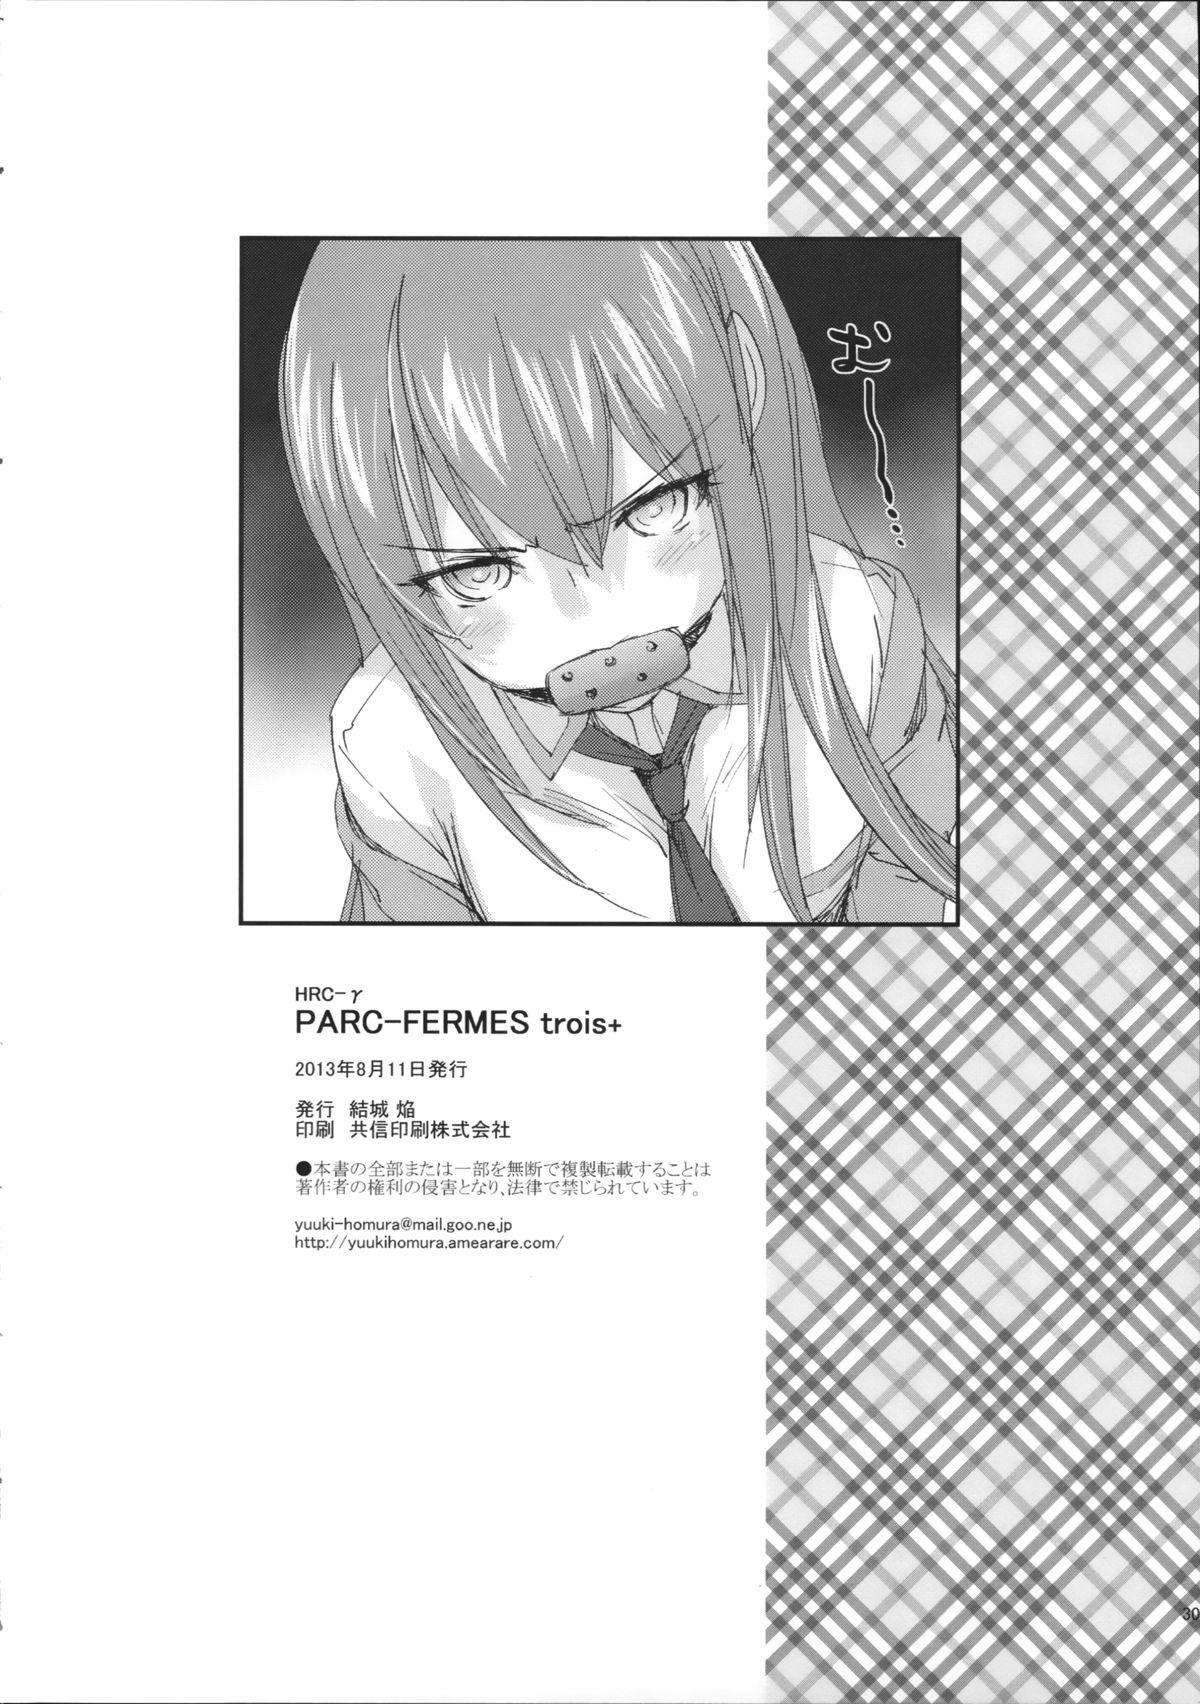 Skinny PARC FERMES TROIS+ - Steinsgate Swallow - Page 30